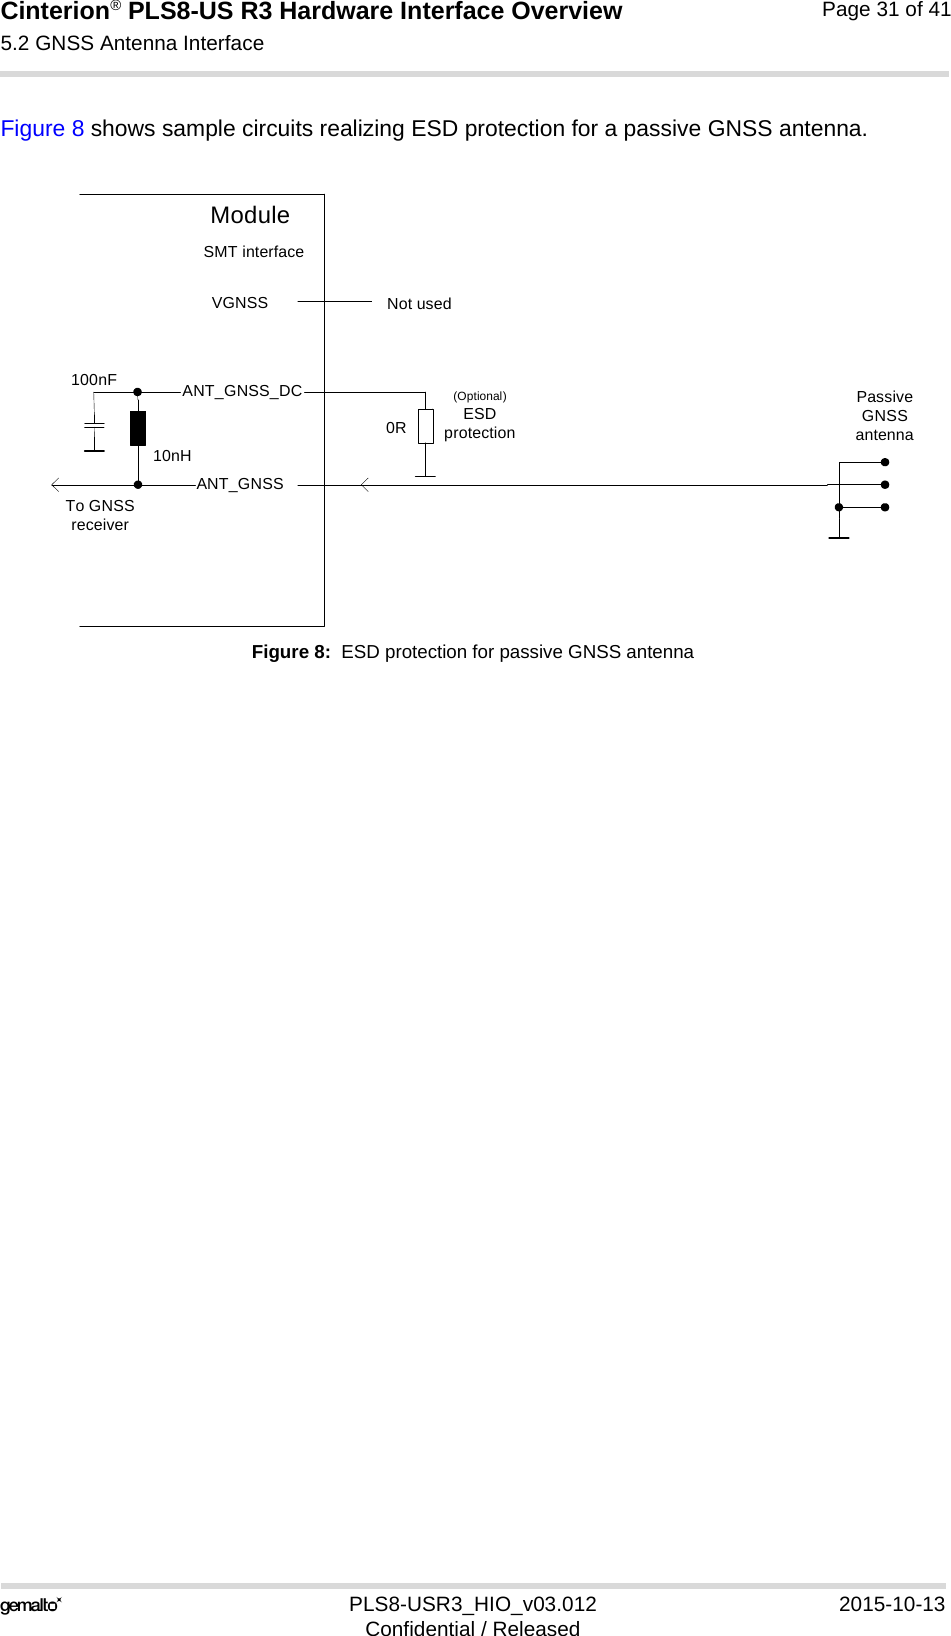 Cinterion® PLS8-US R3 Hardware Interface Overview5.2 GNSS Antenna Interface31PLS8-USR3_HIO_v03.012 2015-10-13Confidential / ReleasedPage 31 of 41Figure 8 shows sample circuits realizing ESD protection for a passive GNSS antenna.Figure 8:  ESD protection for passive GNSS antennaVGNSSANT_GNSSPassive GNSS antenna10nH100nFTo GNSS receiverModuleSMT interfaceANT_GNSS_DC (Optional)ESDprotection0RNot used